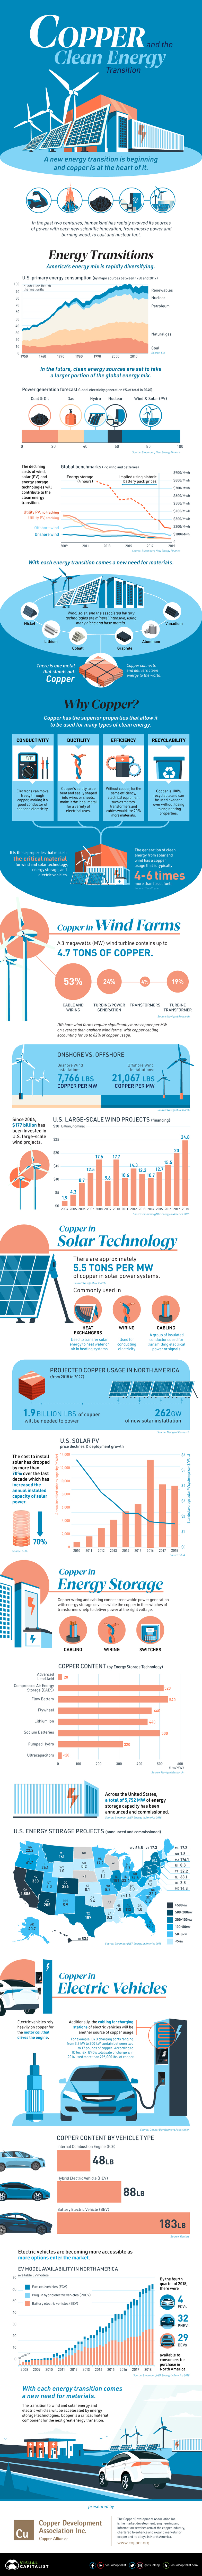 Copper and the Clean Energy Transition